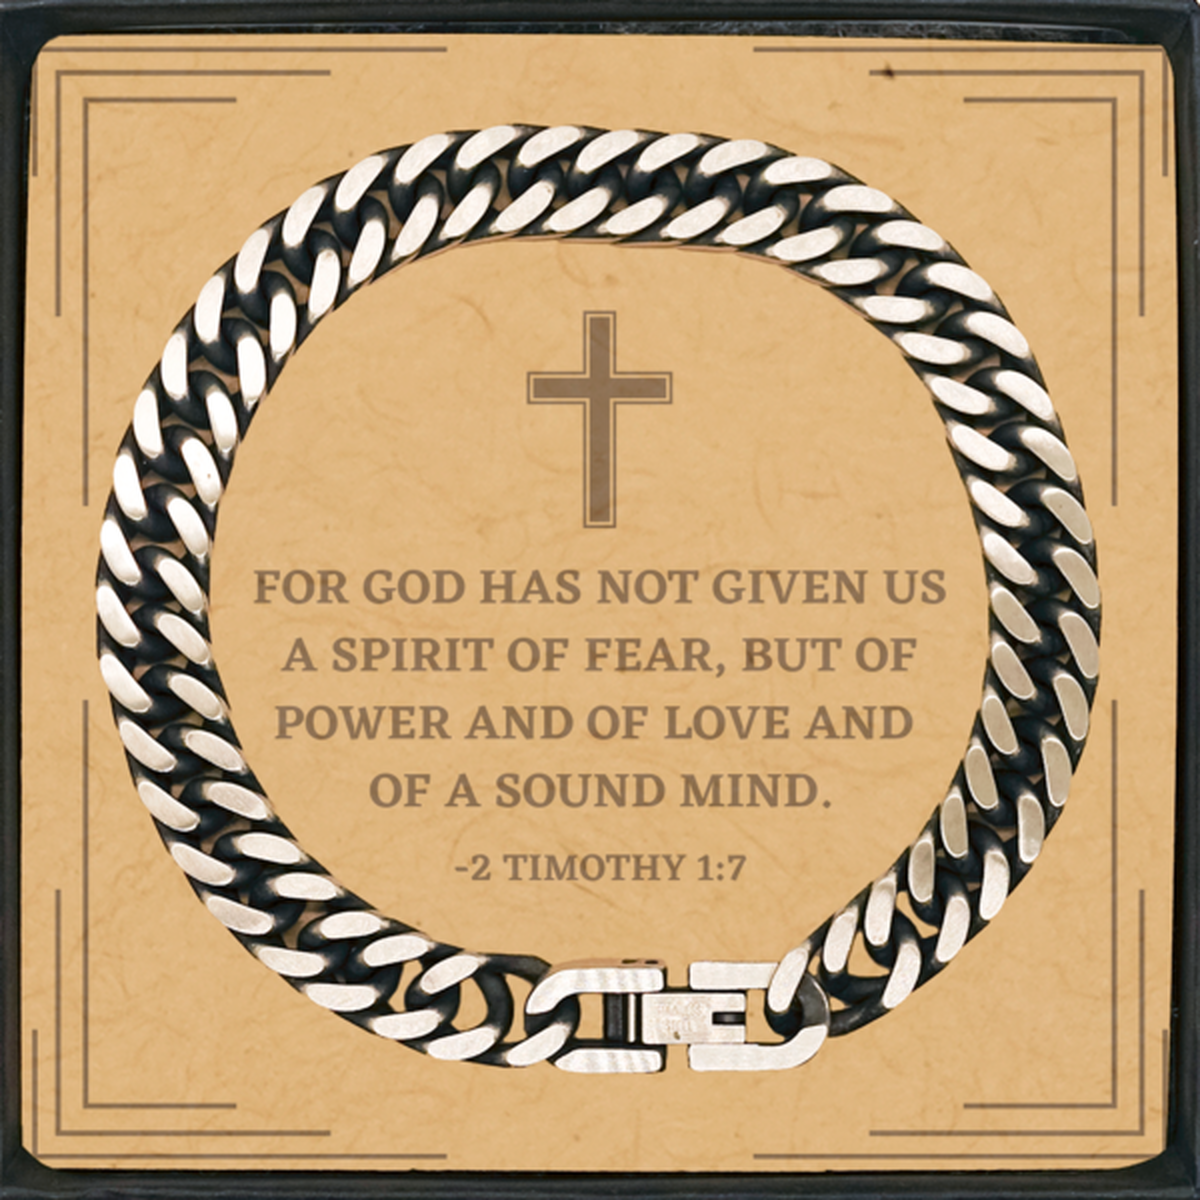 Baptism Gifts For Teenage Boys Girls, Christian Bible Verse Cuban Link Chain Bracelet, For God has not given us, Confirmation Gifts, Bible Verse Card for Son, Godson, Grandson